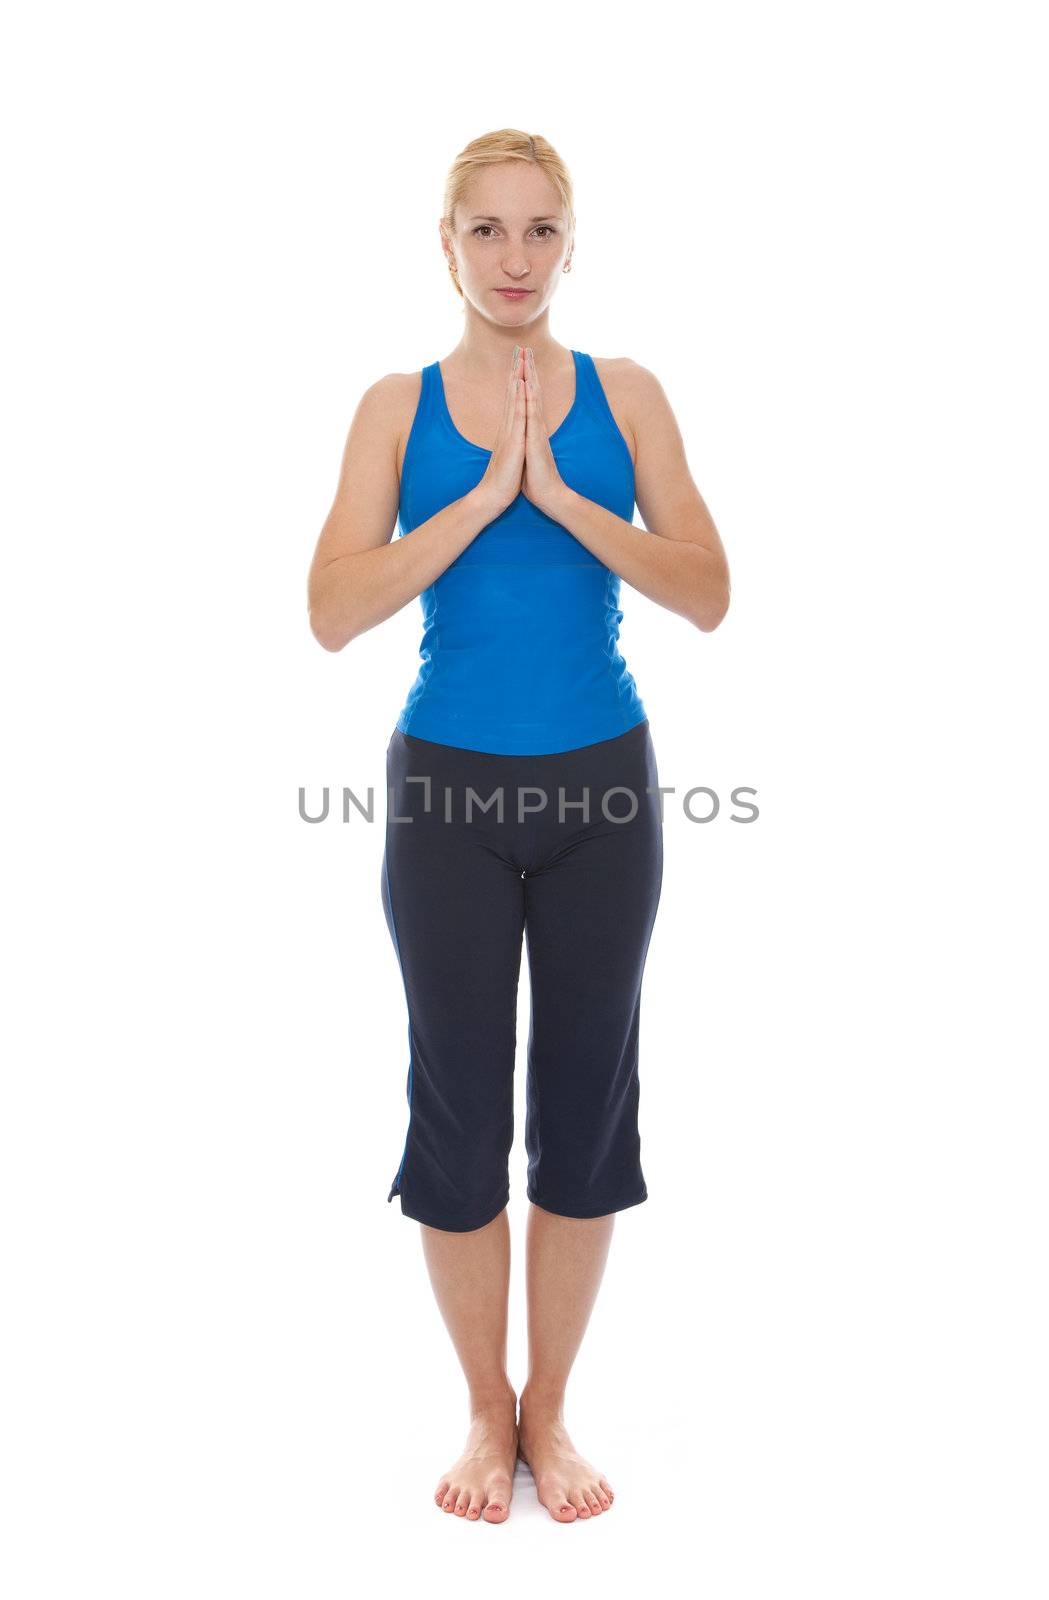 Practicing Yoga. Young woman isolated on white background